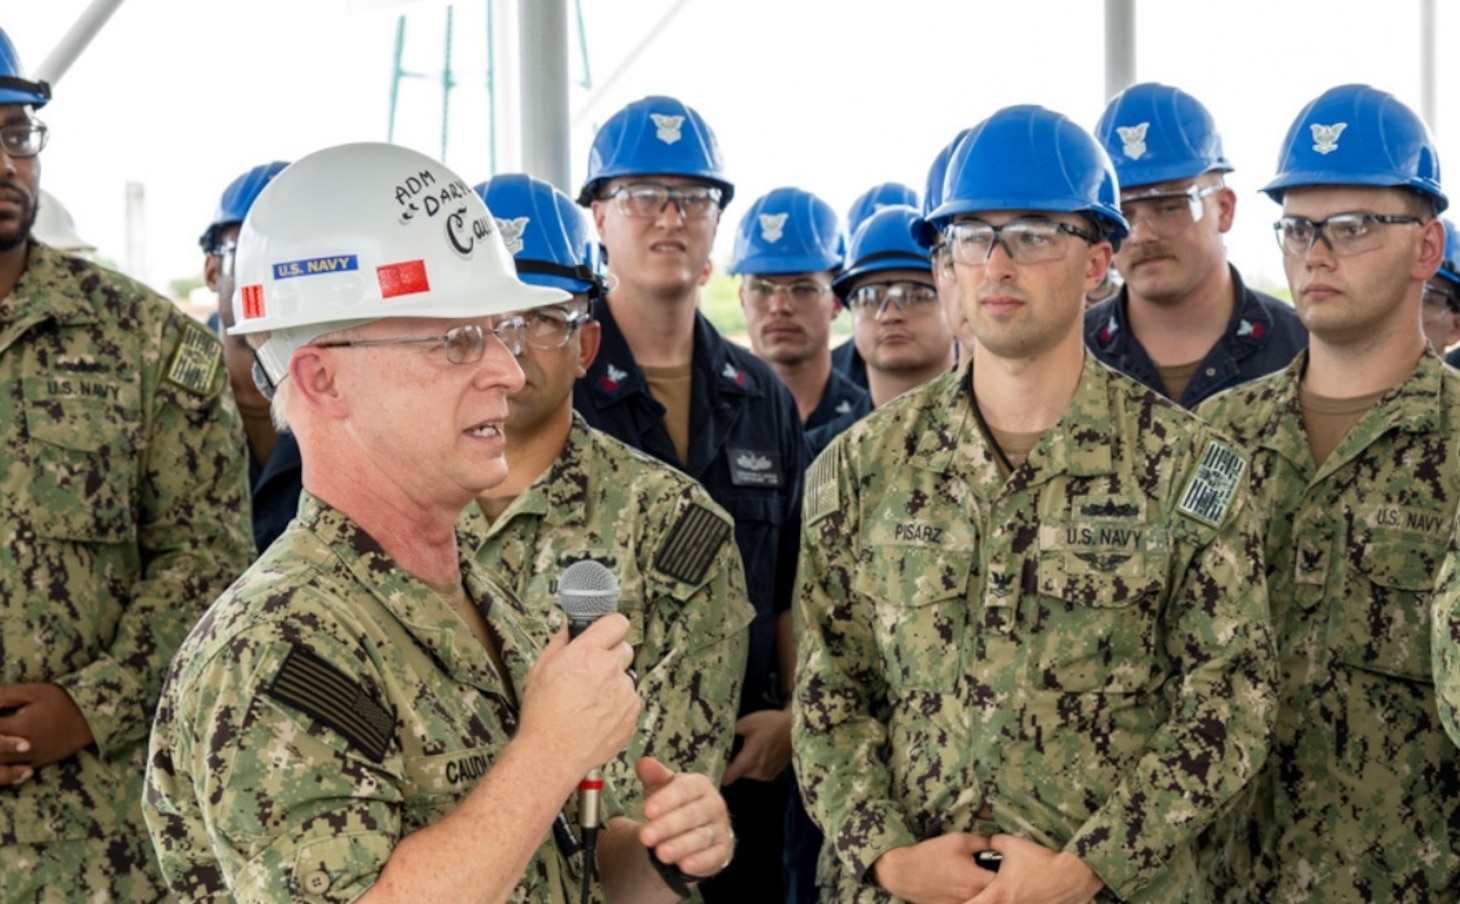 Our awareness of the challenges our sailors face and the respective countermeasures cannot be applied just during Suicide Prevention Month in September, but every month.